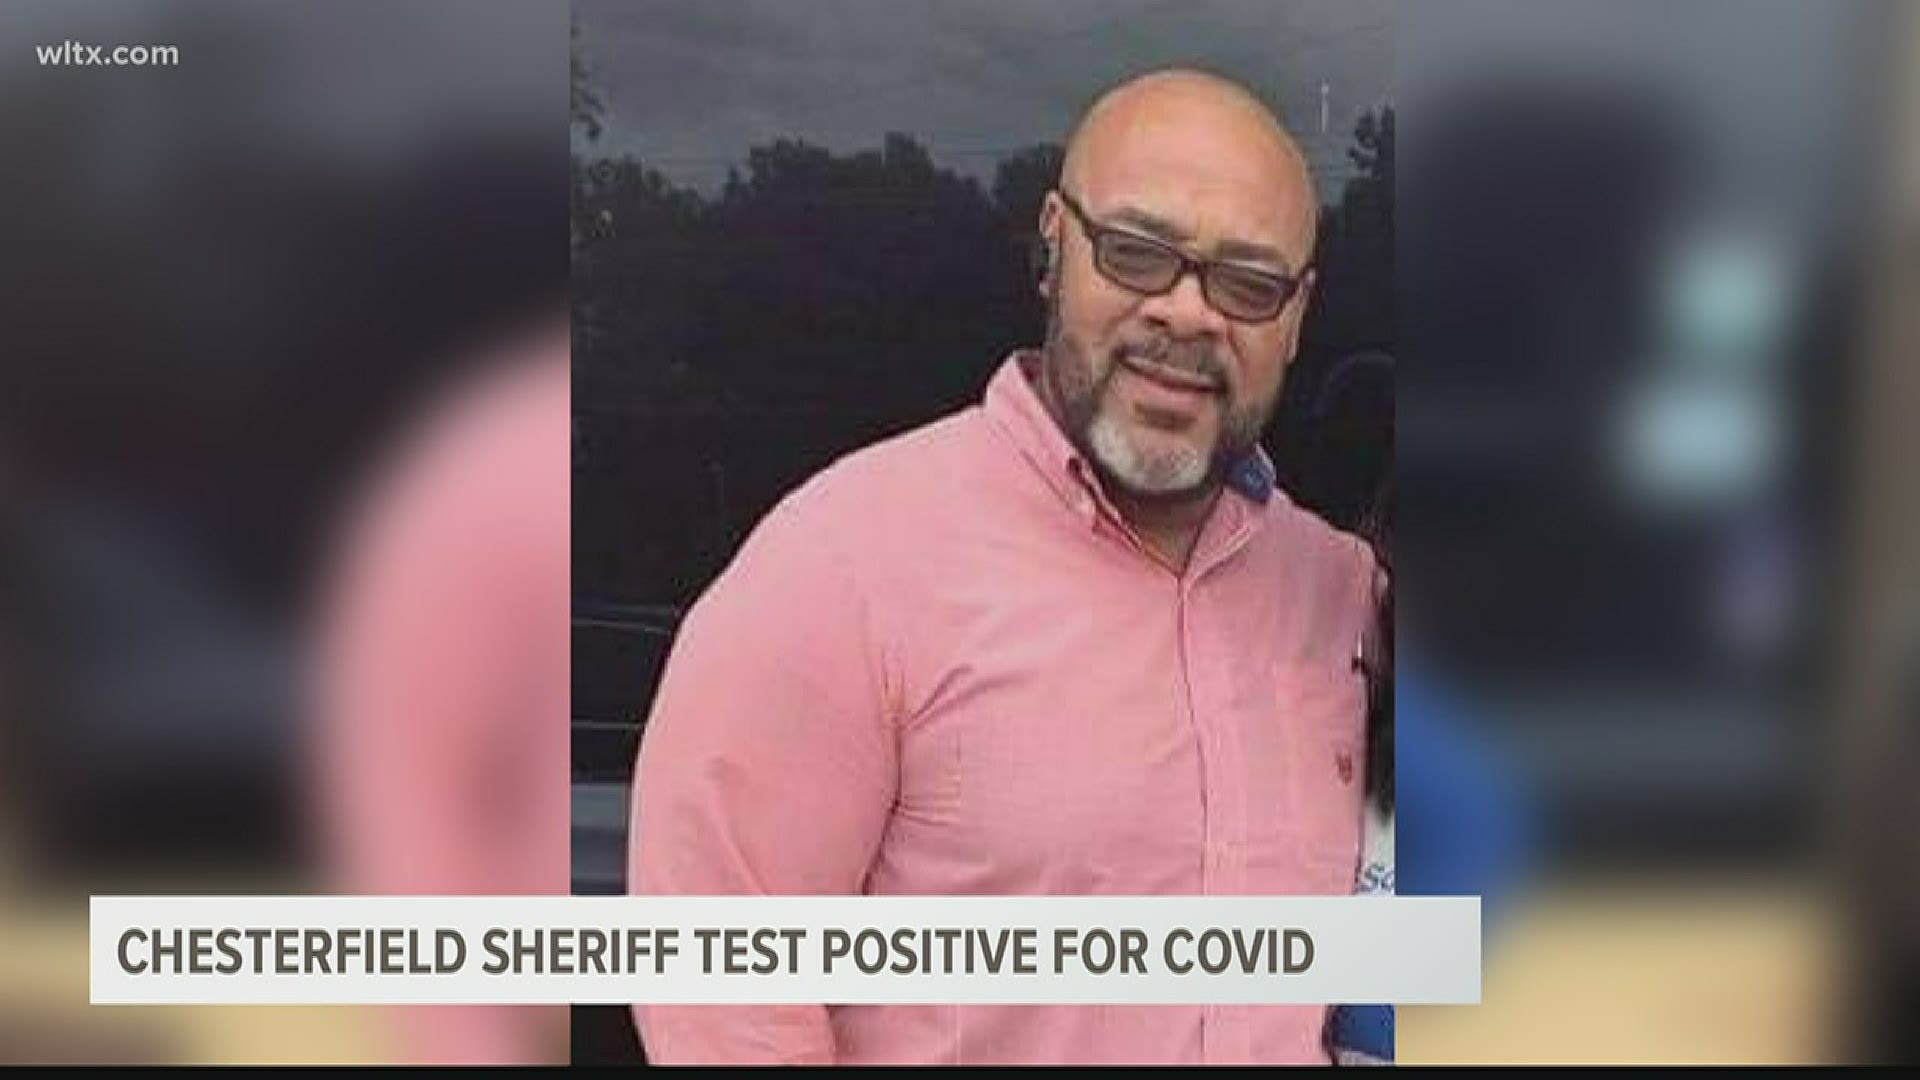 Chesterfield sheriff tests positive for COVID-19 and what the recovery is like. He said it was difficult and wants young people to take this seriously